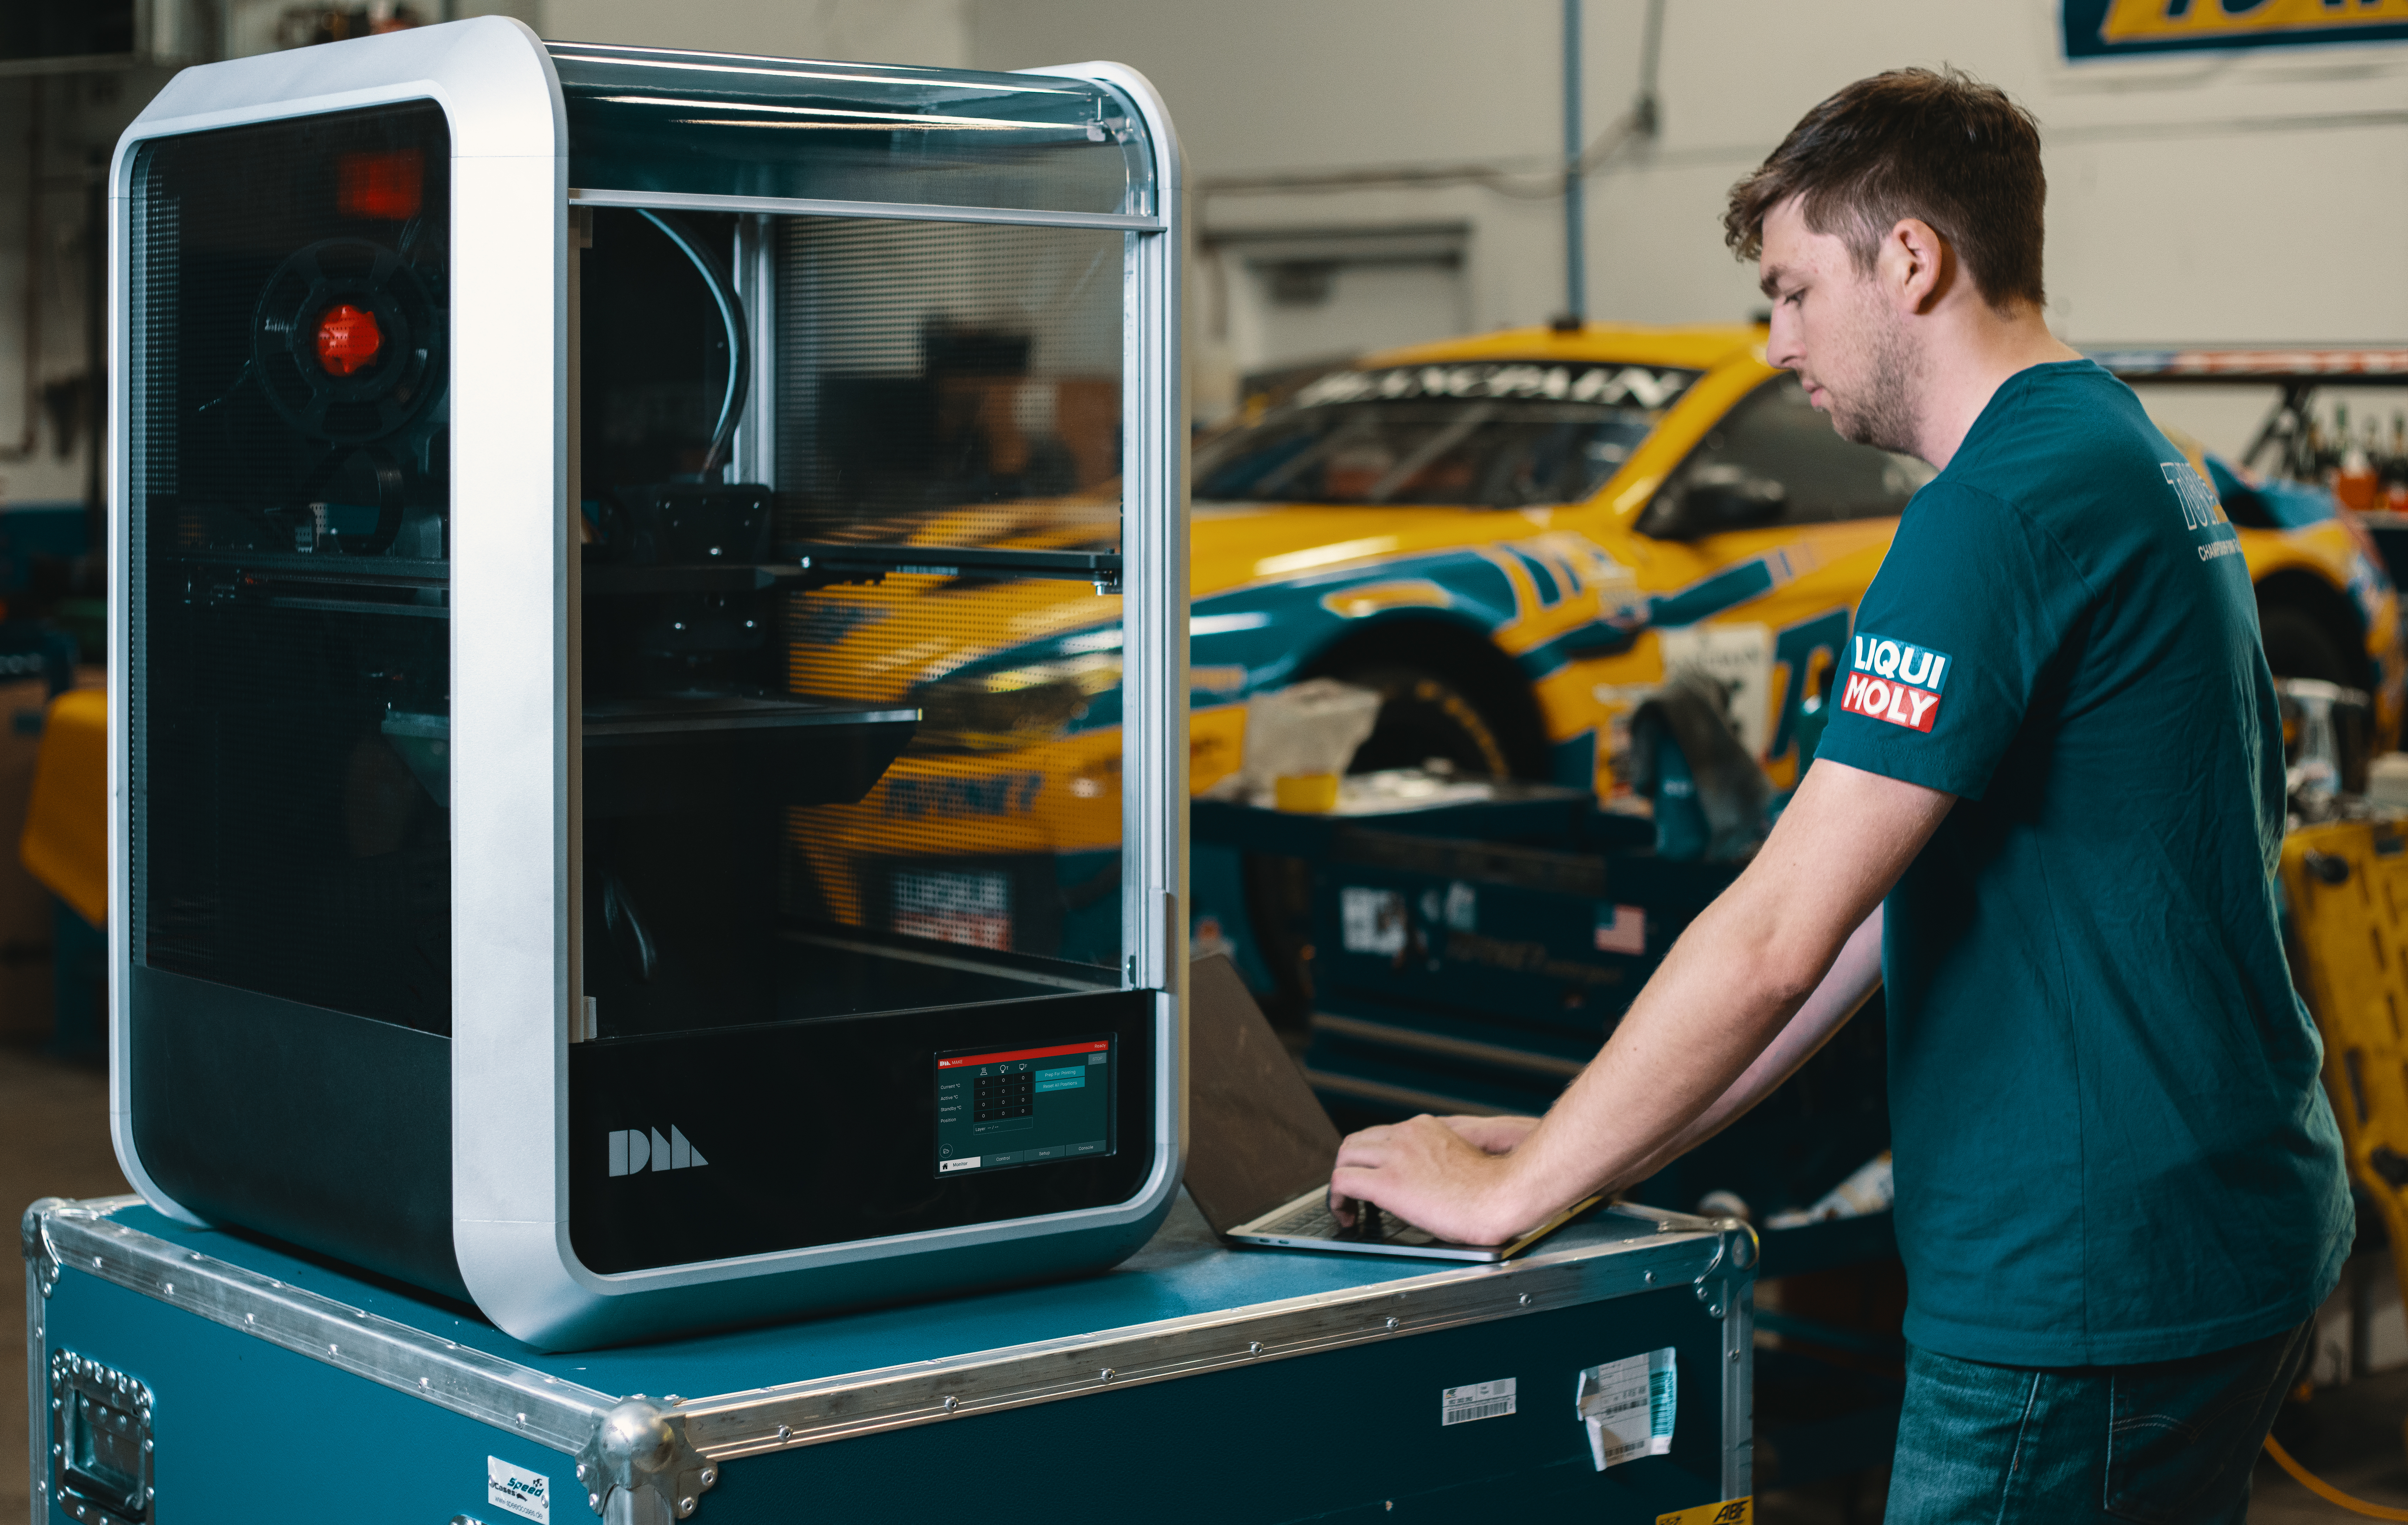 Desktop Metal's 3D printers have been adopted within a wide range of industries, but is especially well-suited to automotive applications. Image via Desktop Metal.